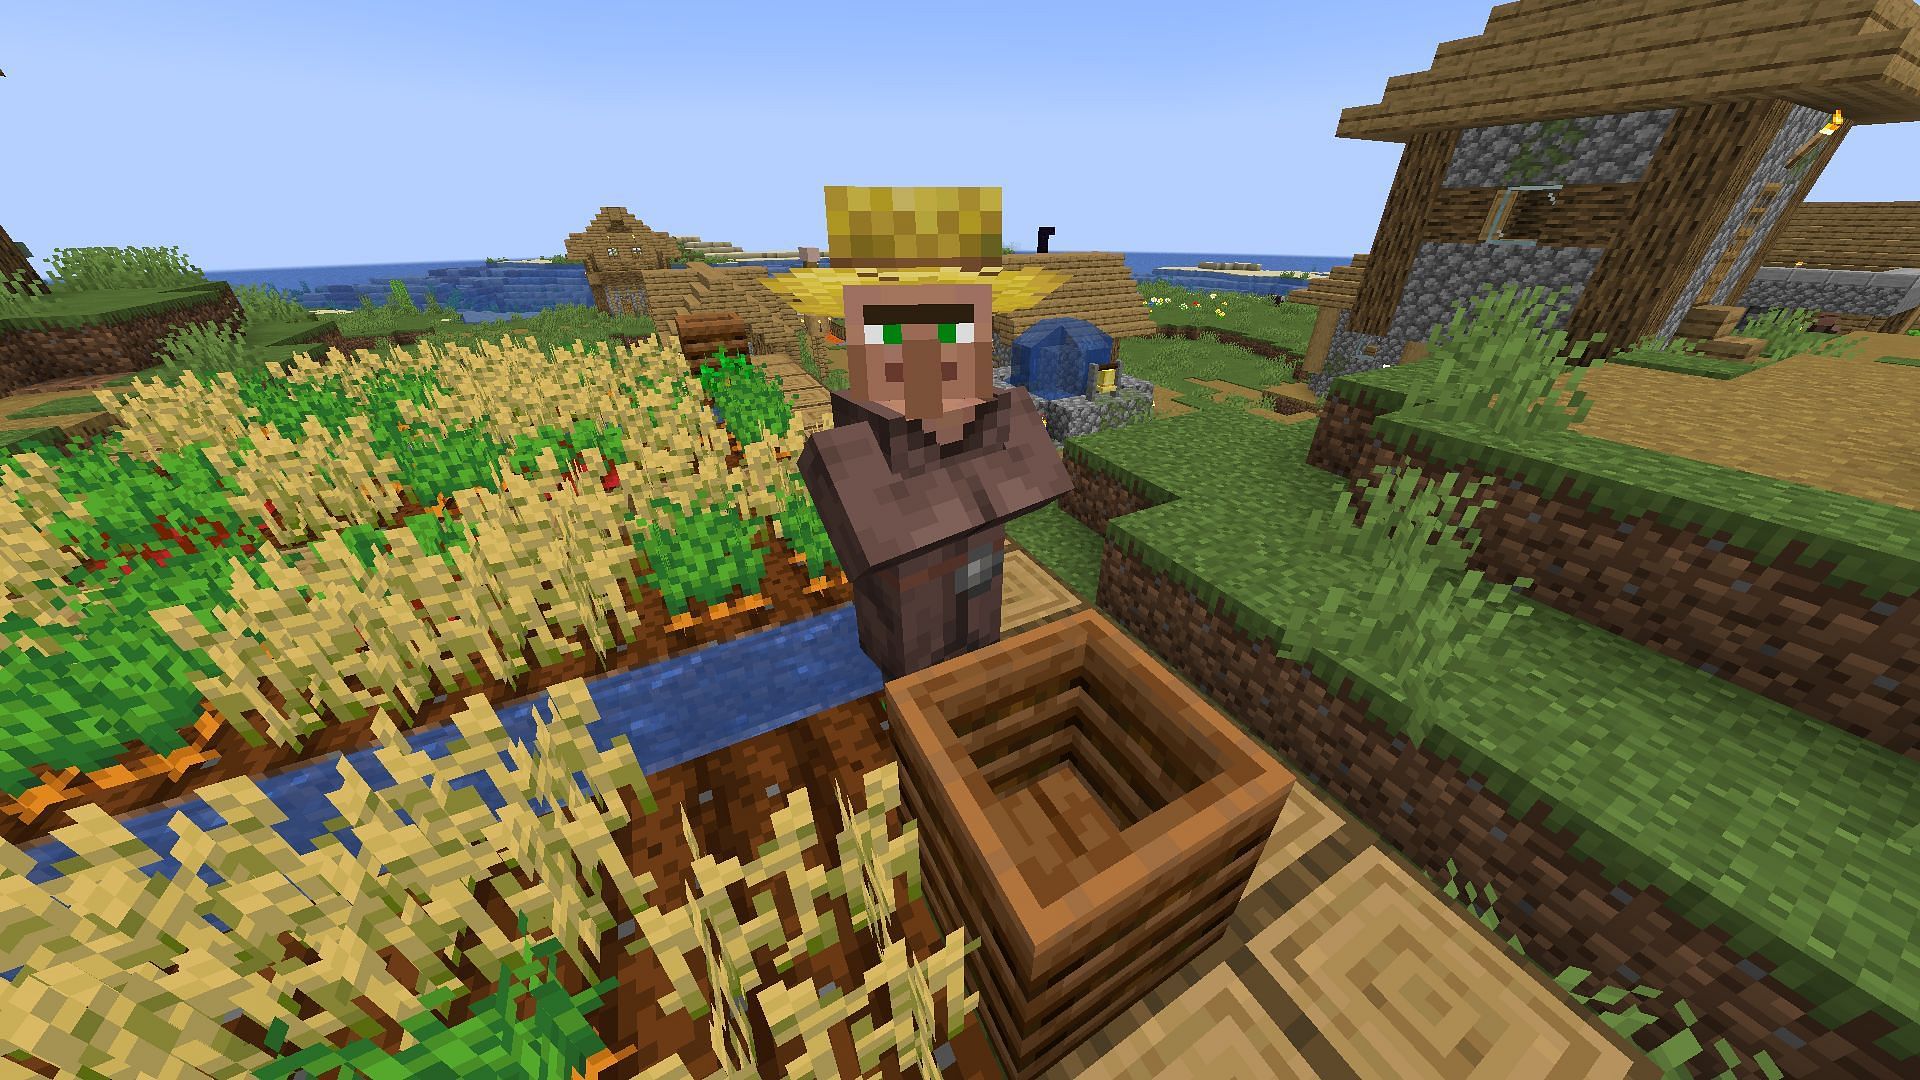 Players can get ample XP by trading with villagers in Minecraft (Image via Mojang)